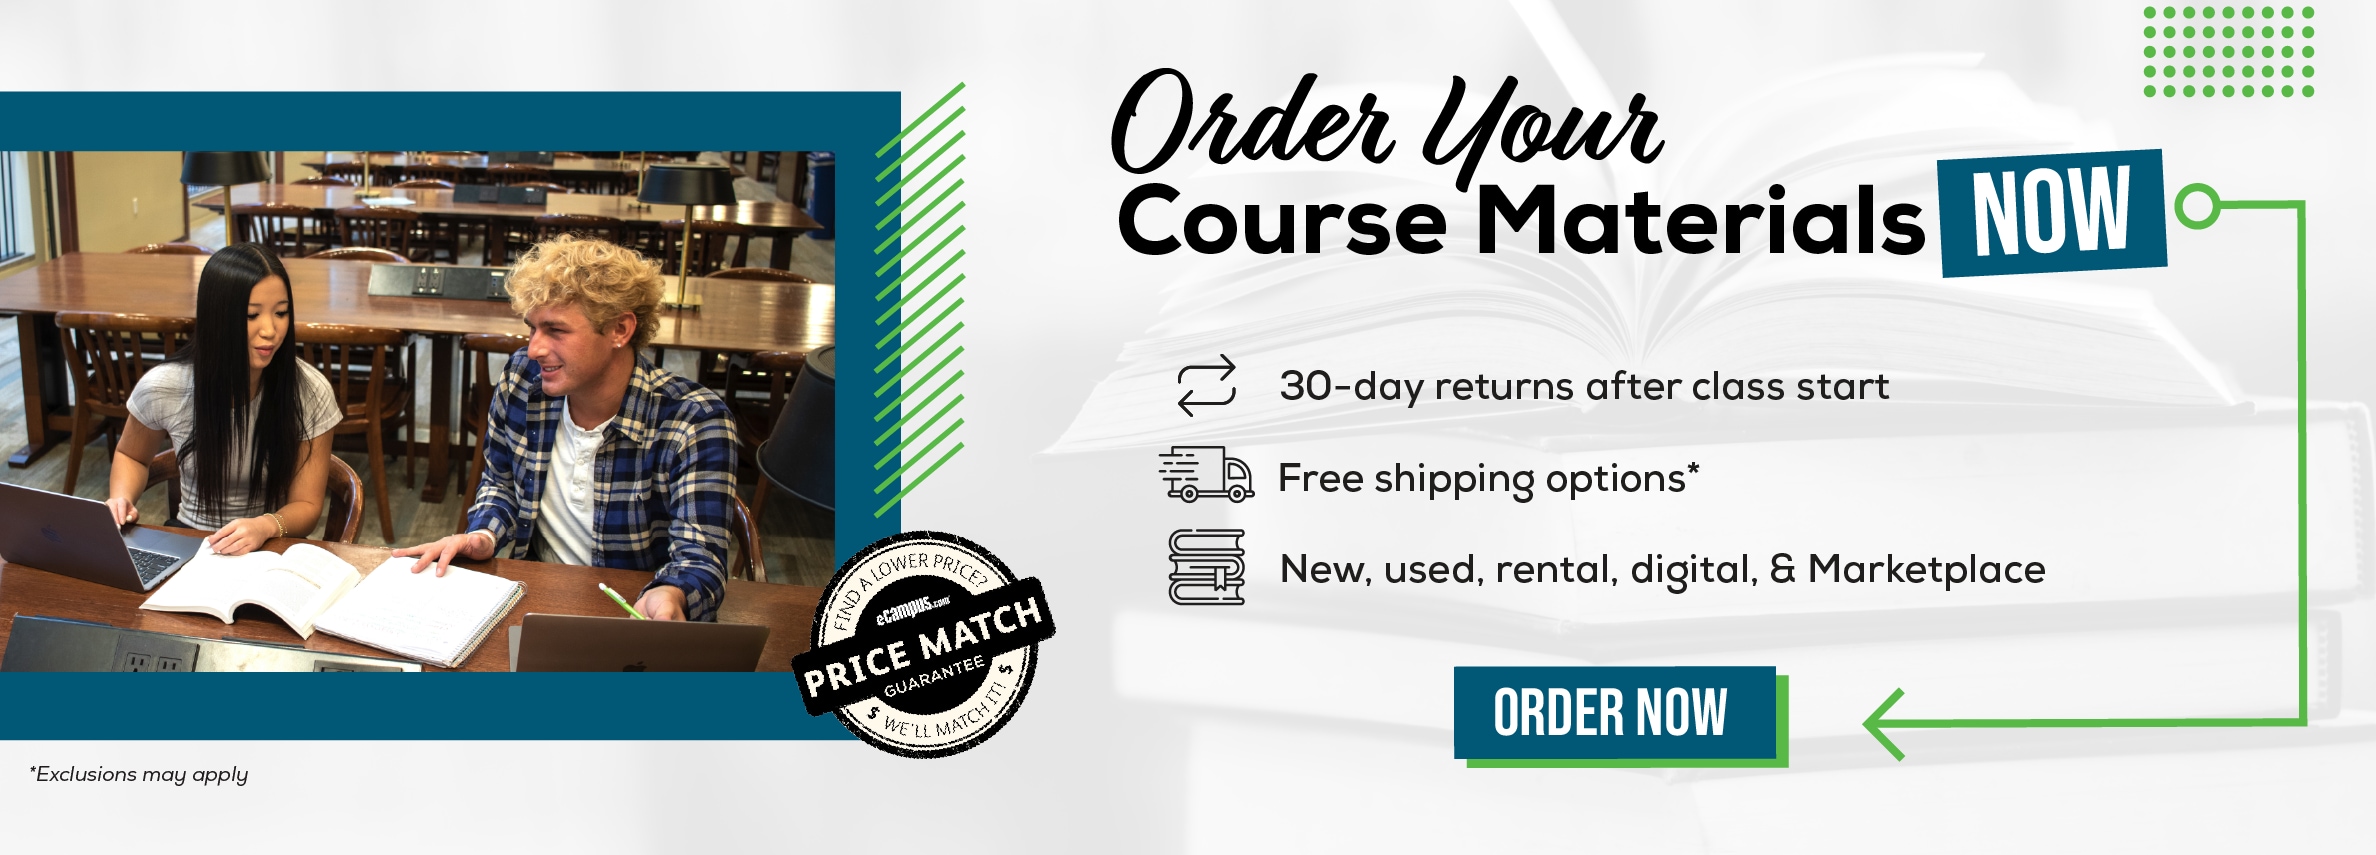 Order Your Course Materials Now. 30-day returns after class start. Free 2-day shipping options* New, used, rental, digital, & Marketplace. Order now. *Exclusions may apply.